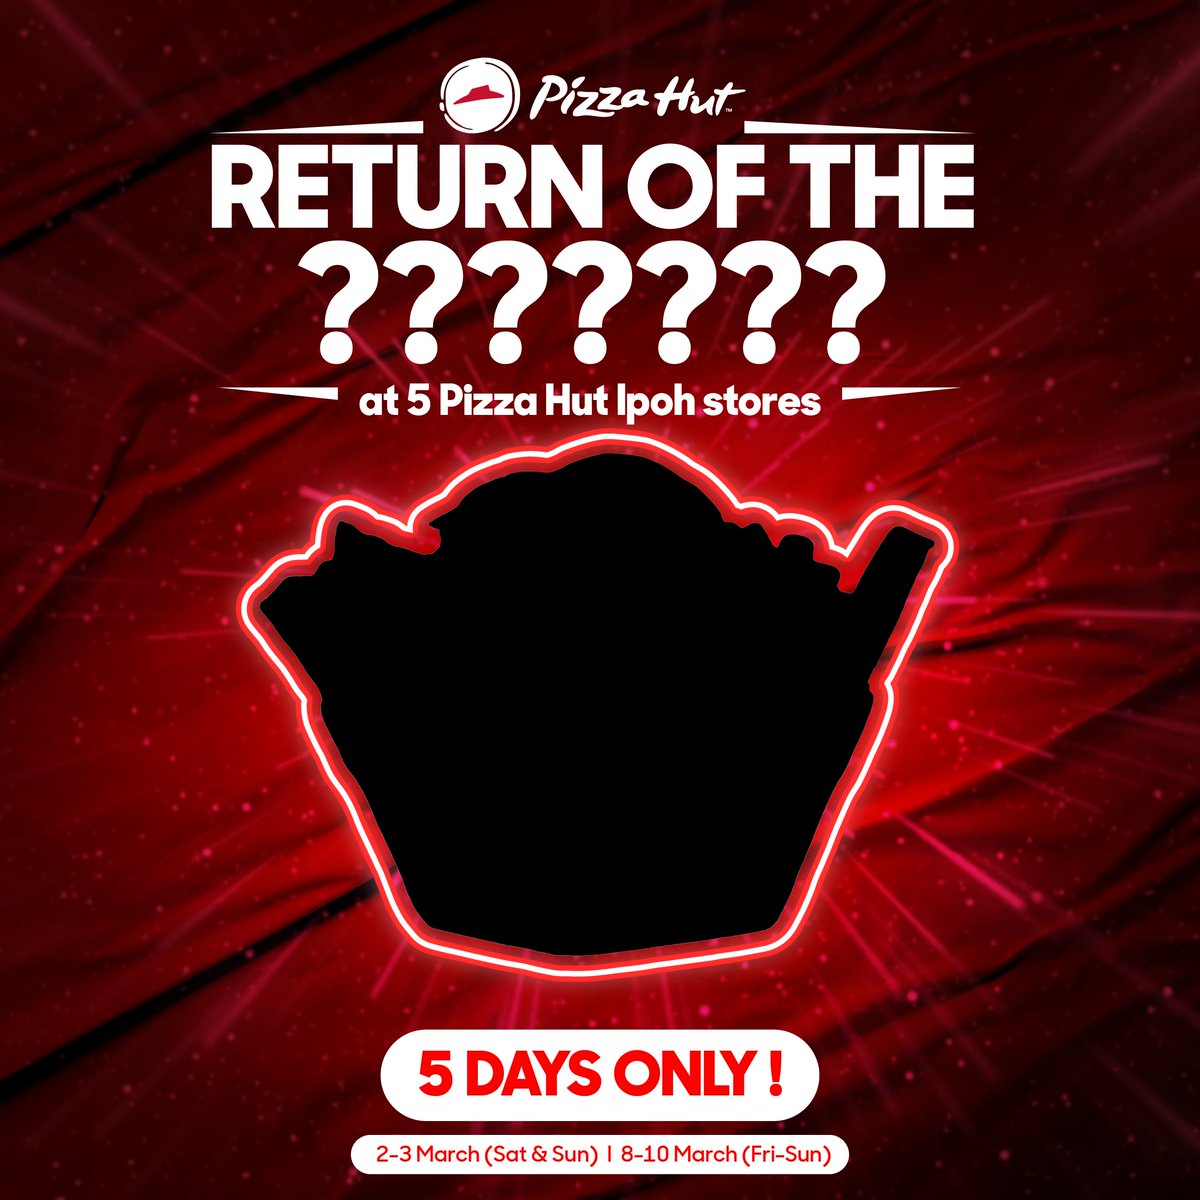 Calling all Ipoh people. Guess who's making a fresh, crispy comeback? Get ready to pile your plate high because it will be back and better than ever. Stay tuned for more delicious updates! #pizzahutmalaysia #onlyinipoh #returnofthegreens